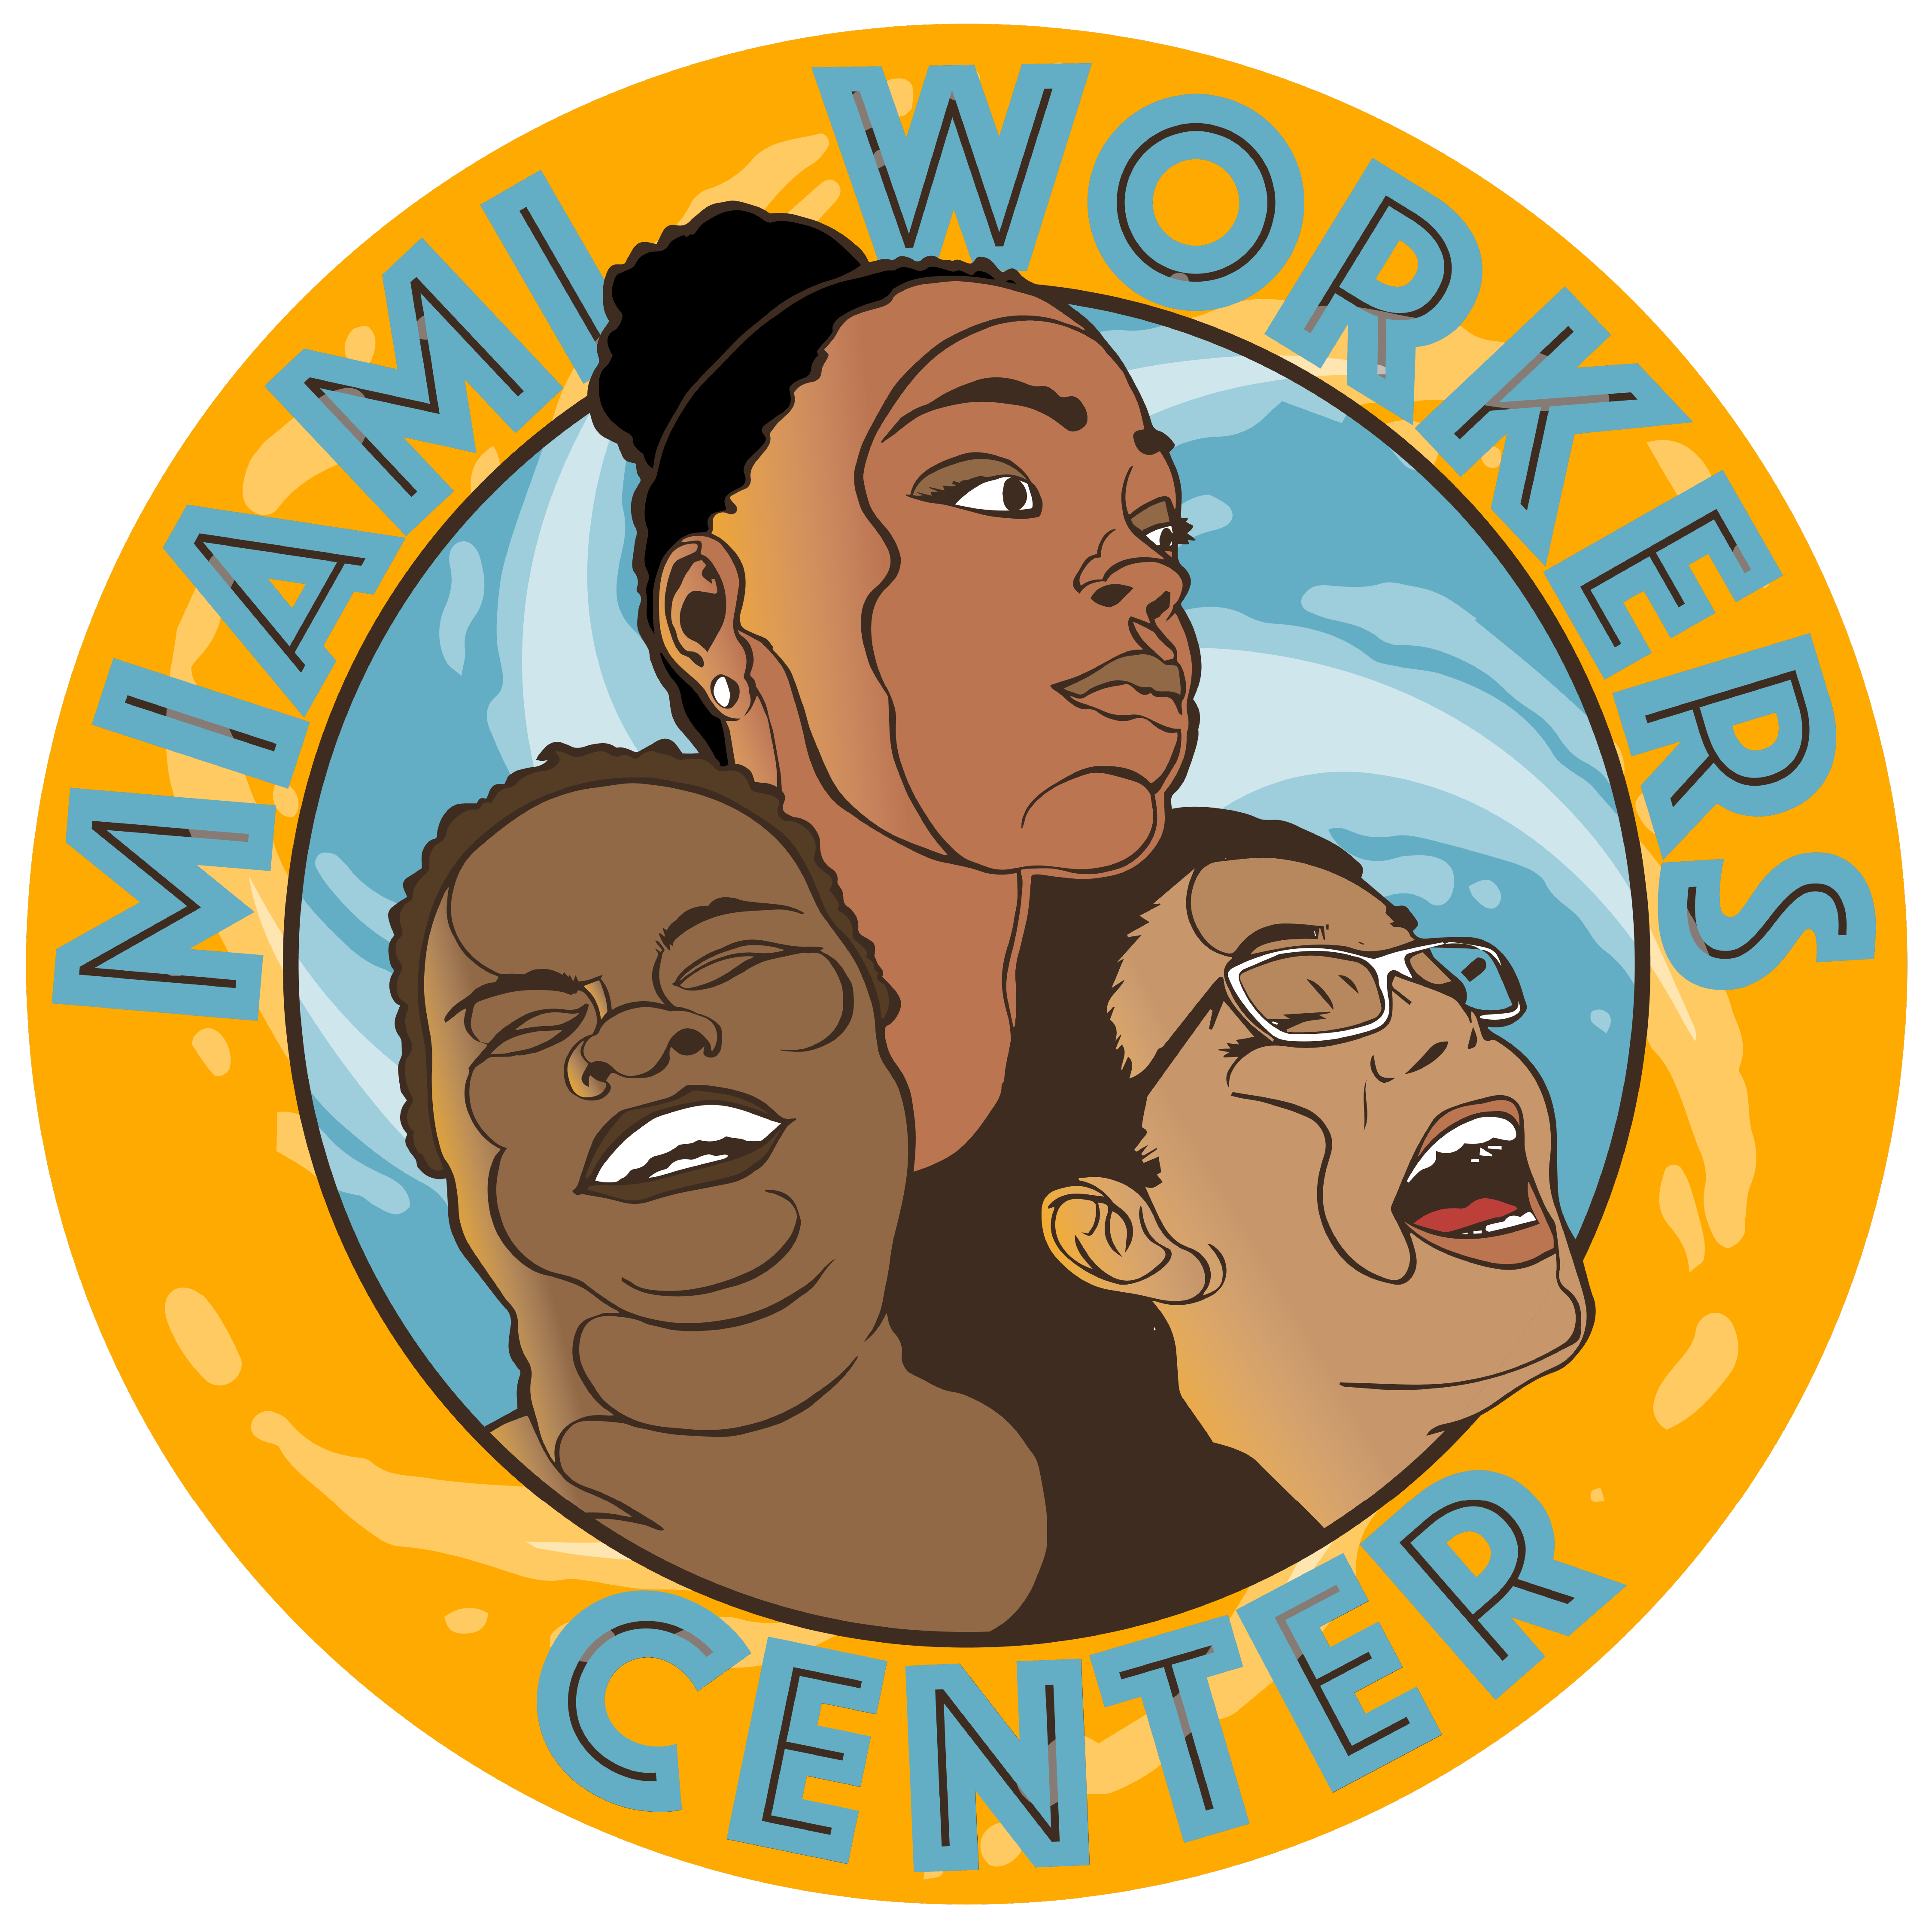 Logo for Miami Workers Center. Features 3 women of color smiling.